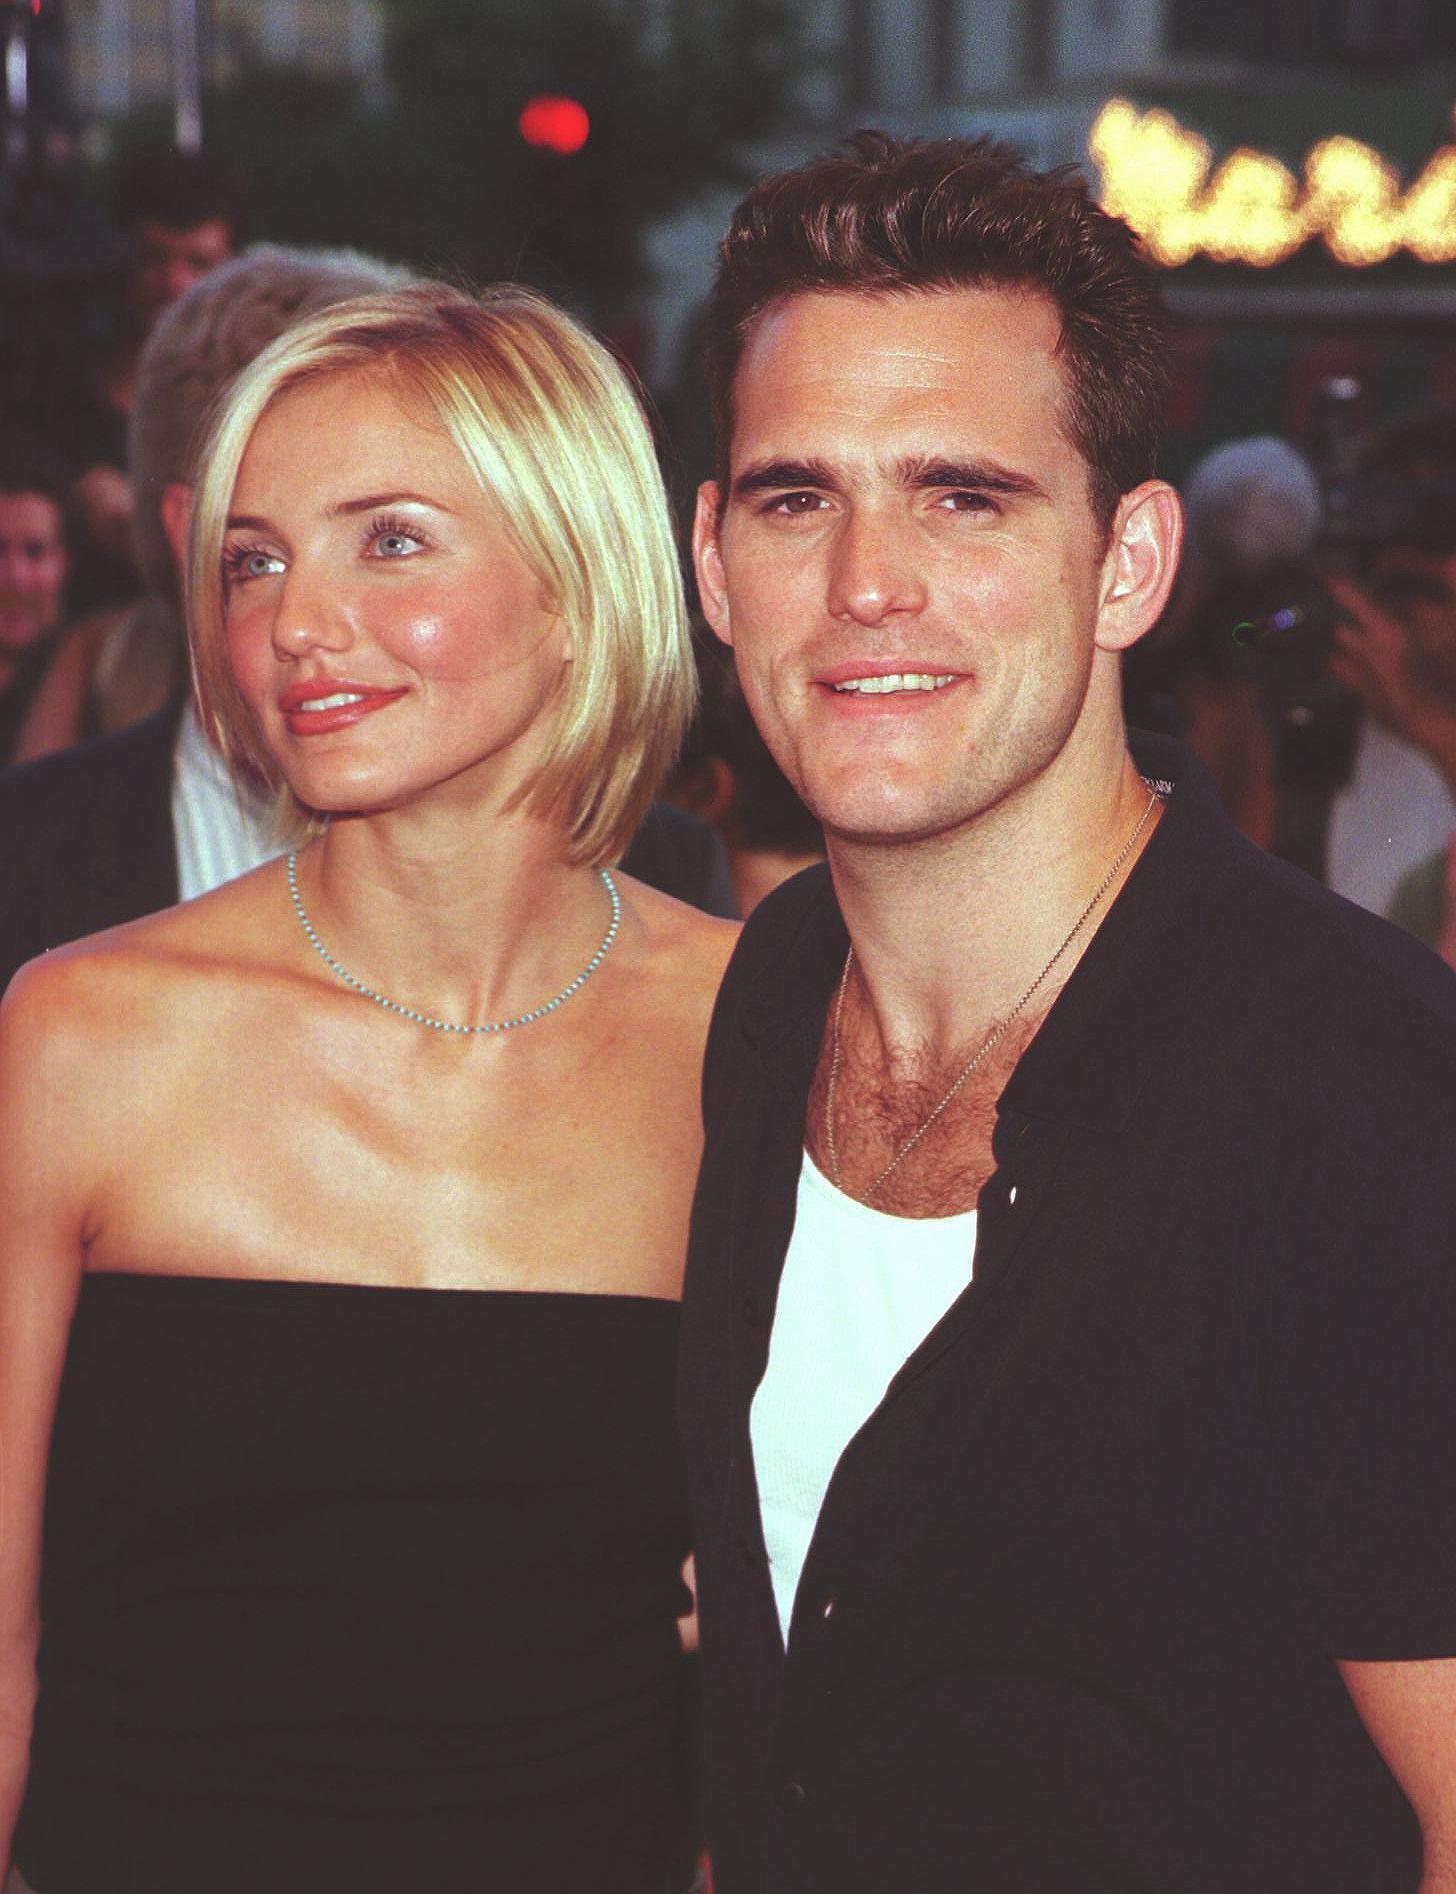 Cameron Diaz and Matt Dillon arrive for the premiere of 'There's Something About Mary'